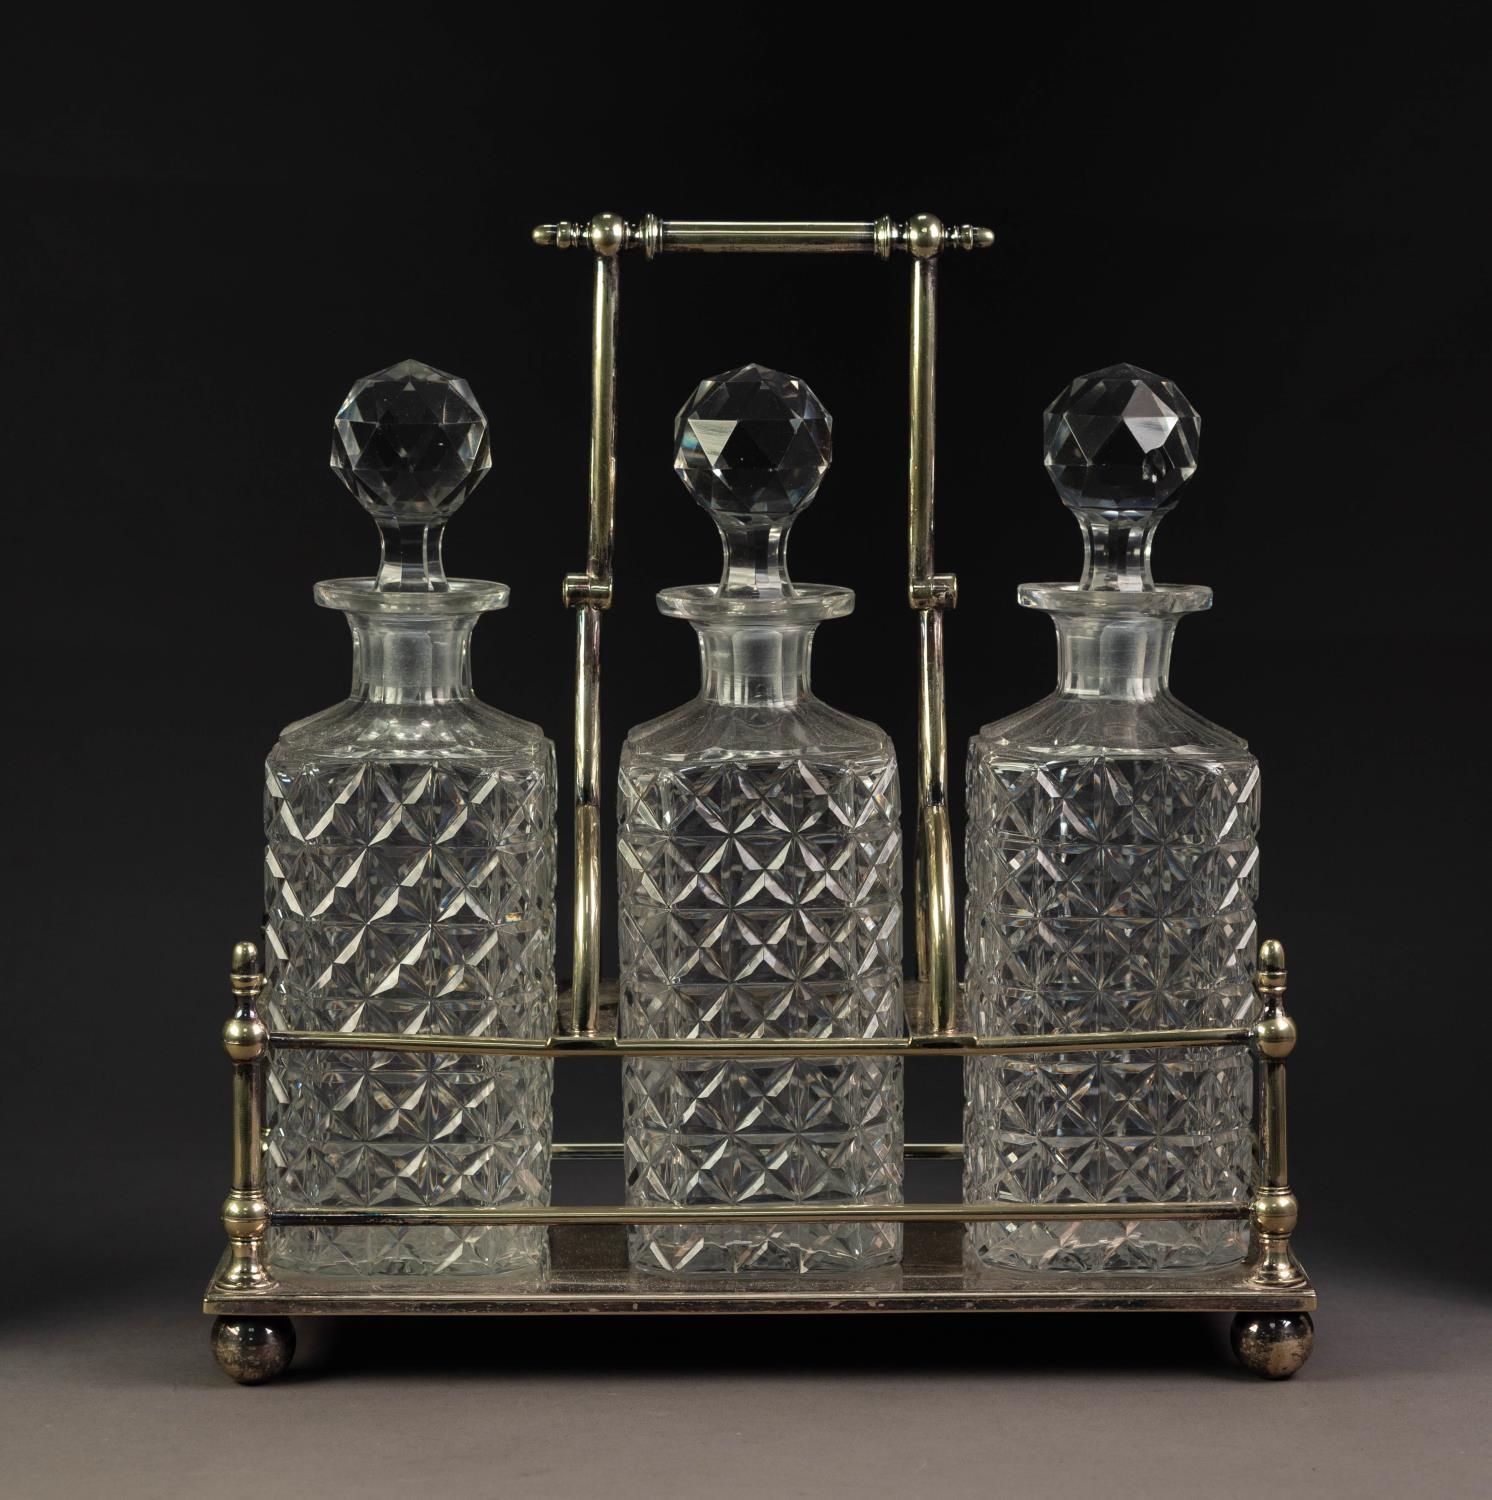 INTER-WAR YEARS ELECTROPLATED DECANTER STAND, with three well-cut square decanters, with carrying